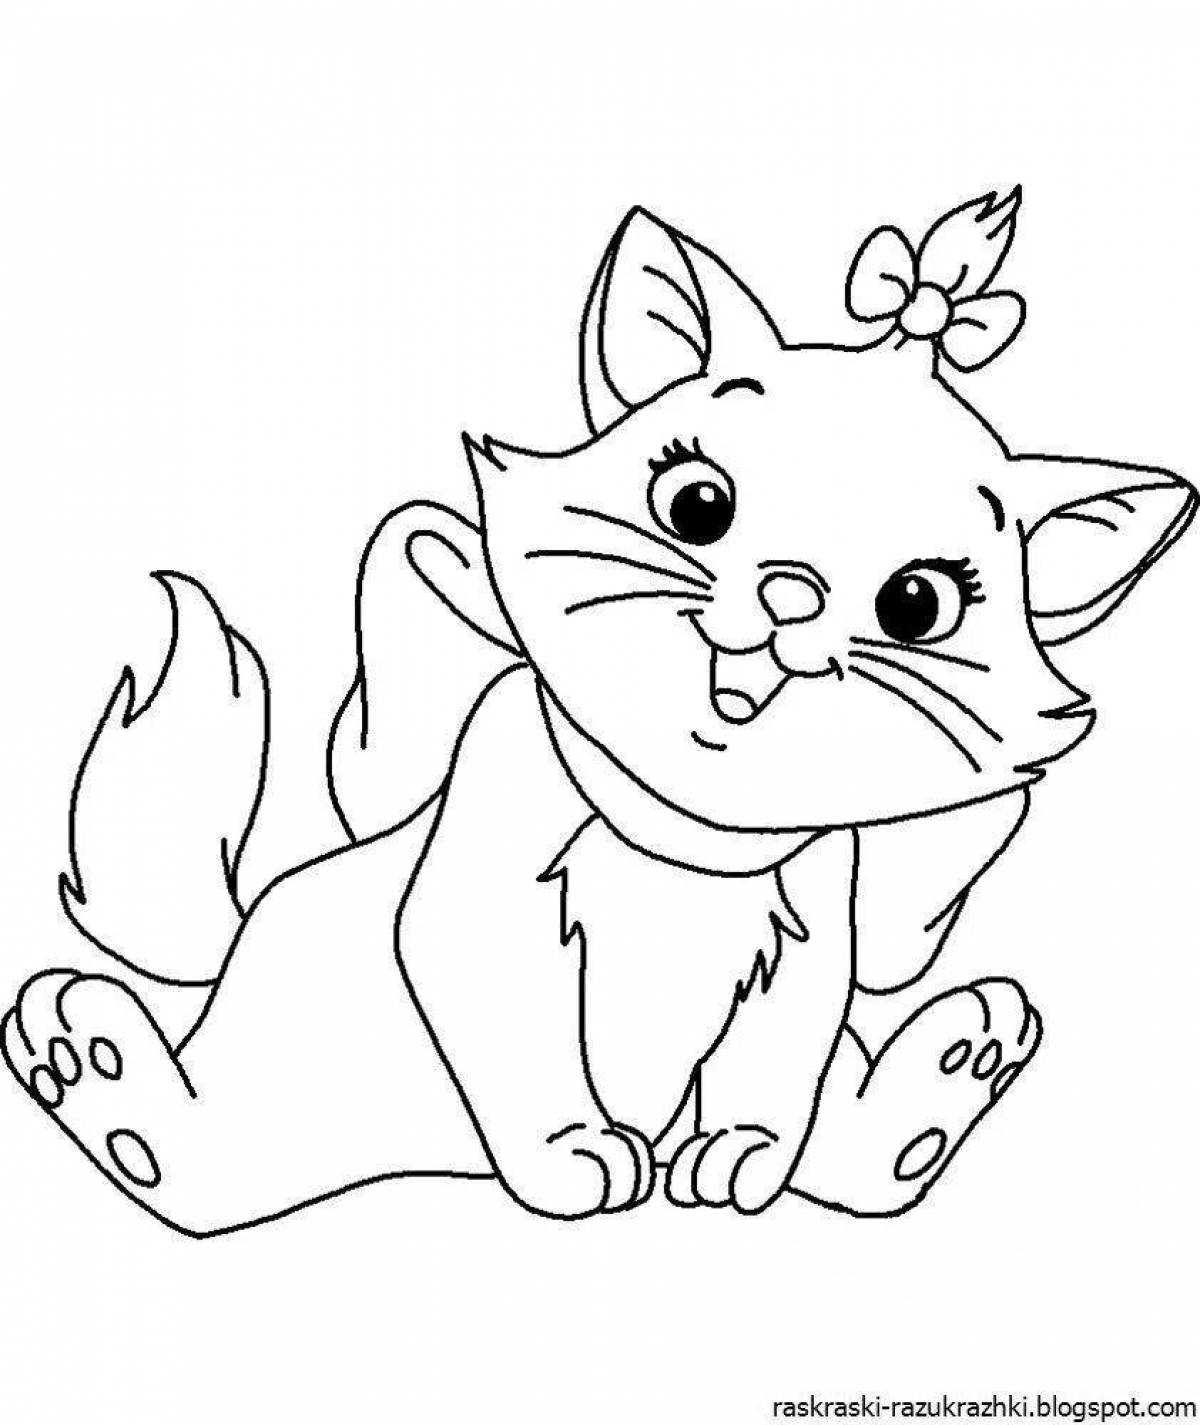 Adorable kitten coloring book for kids 5-6 years old